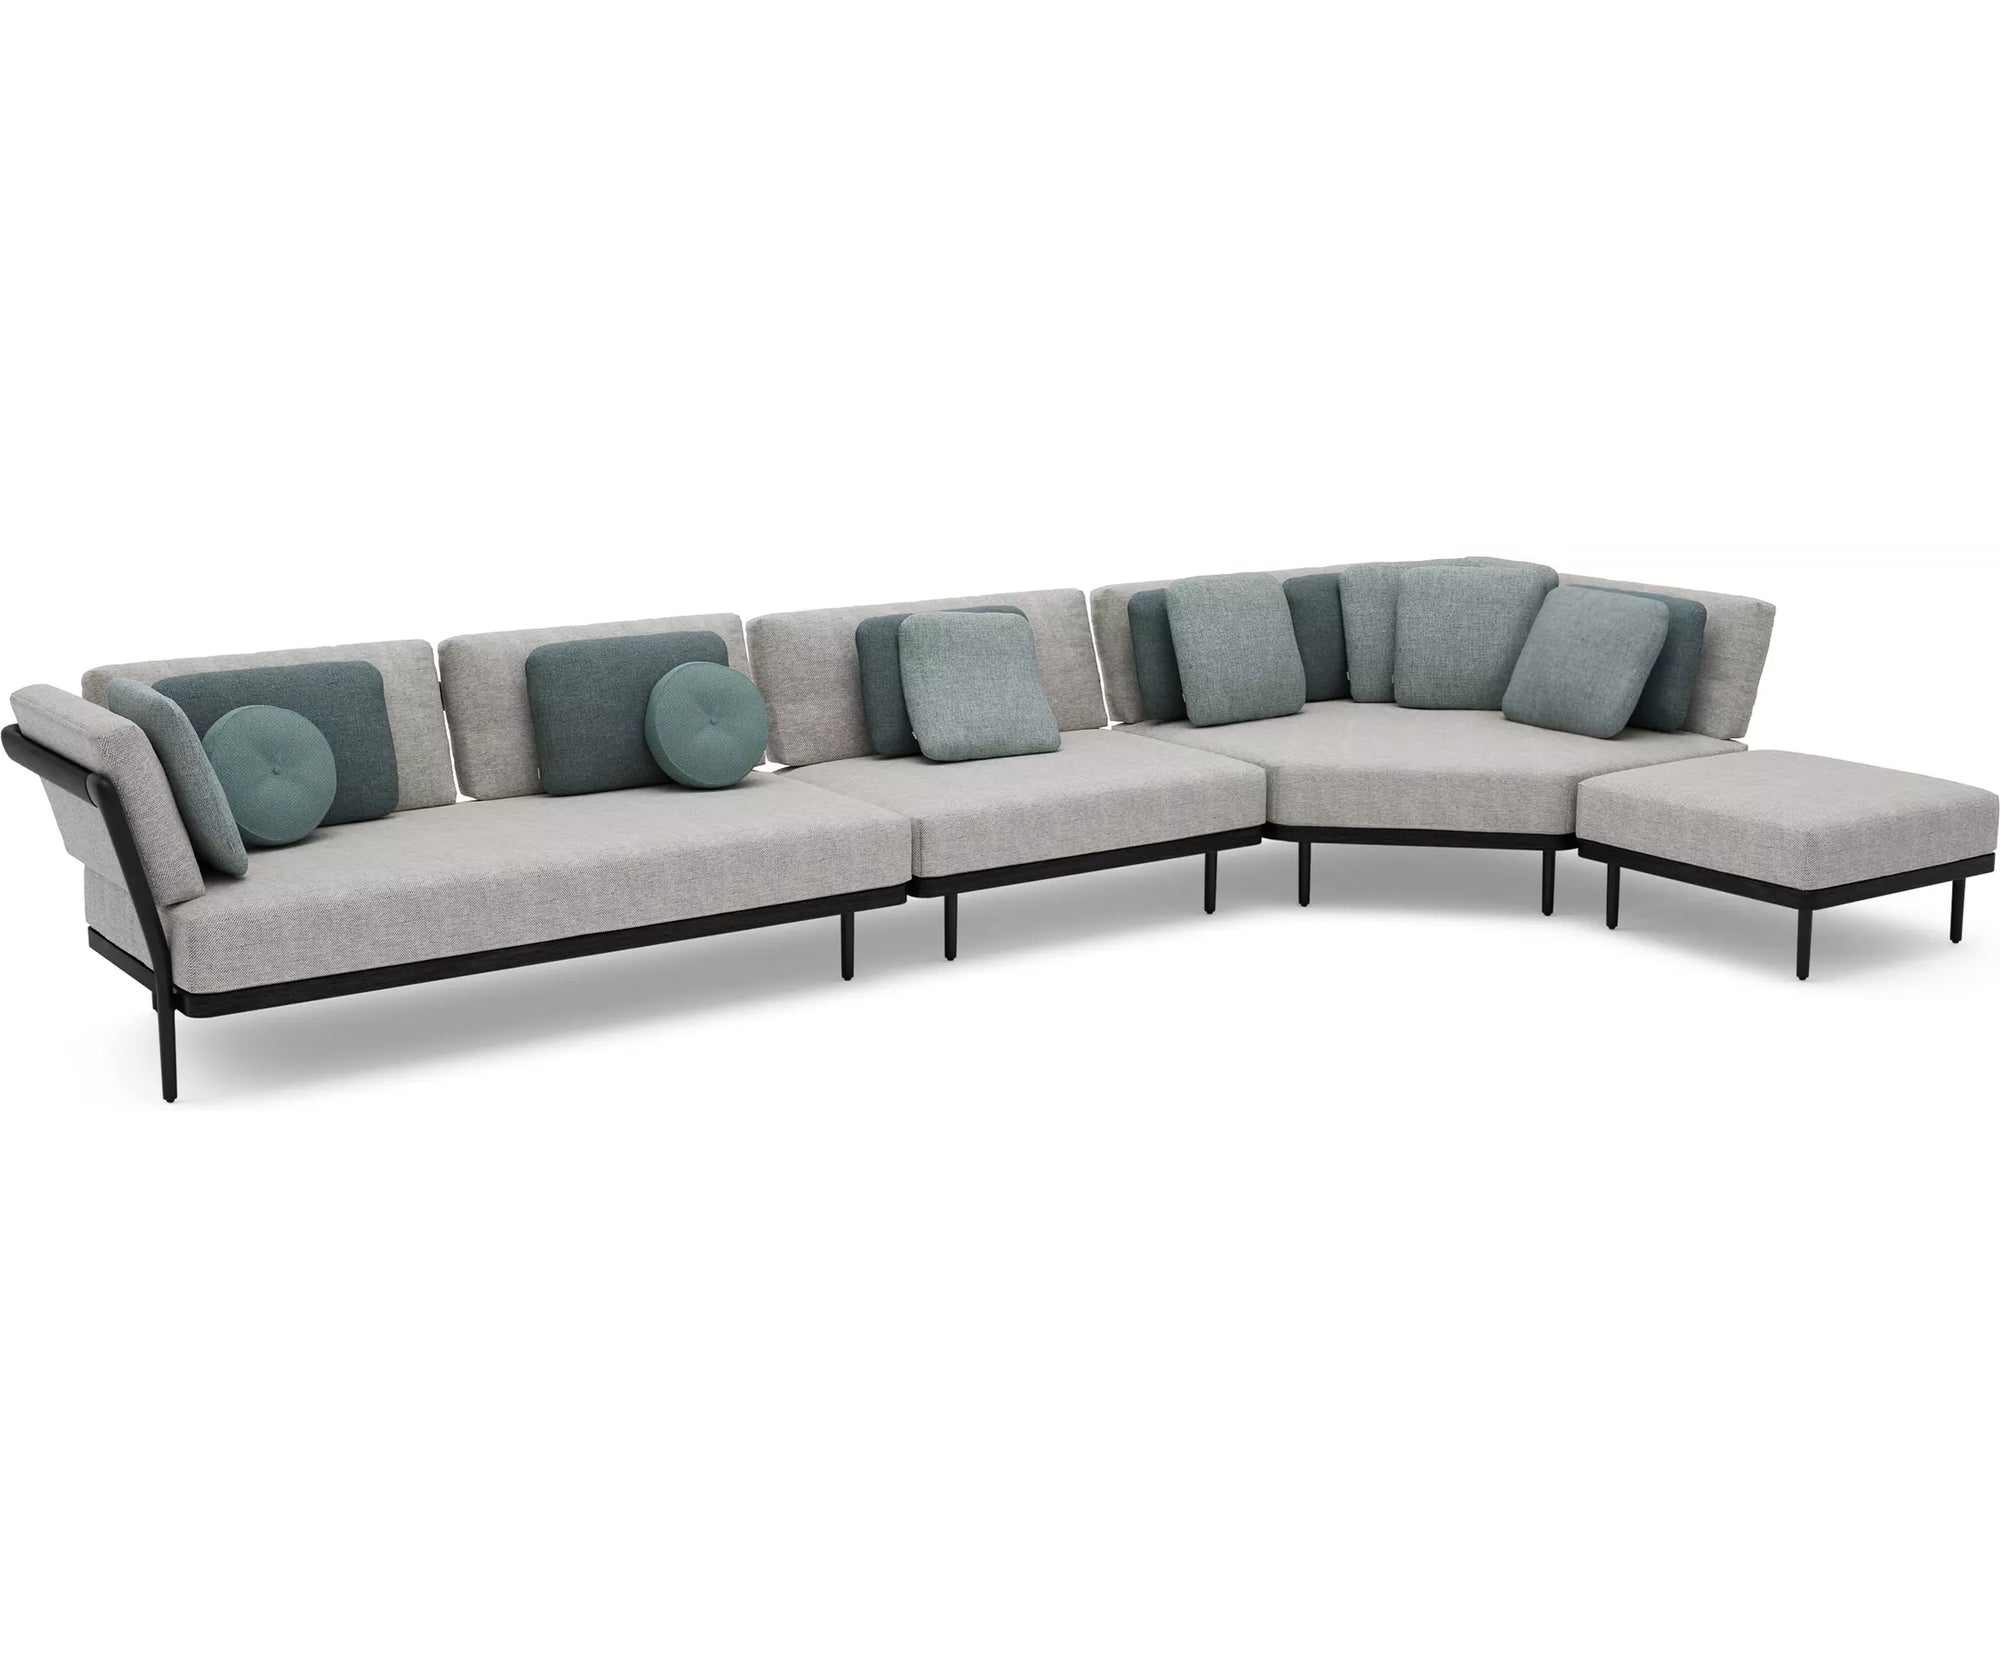 Flows Sectional Concept 10 | Manutti